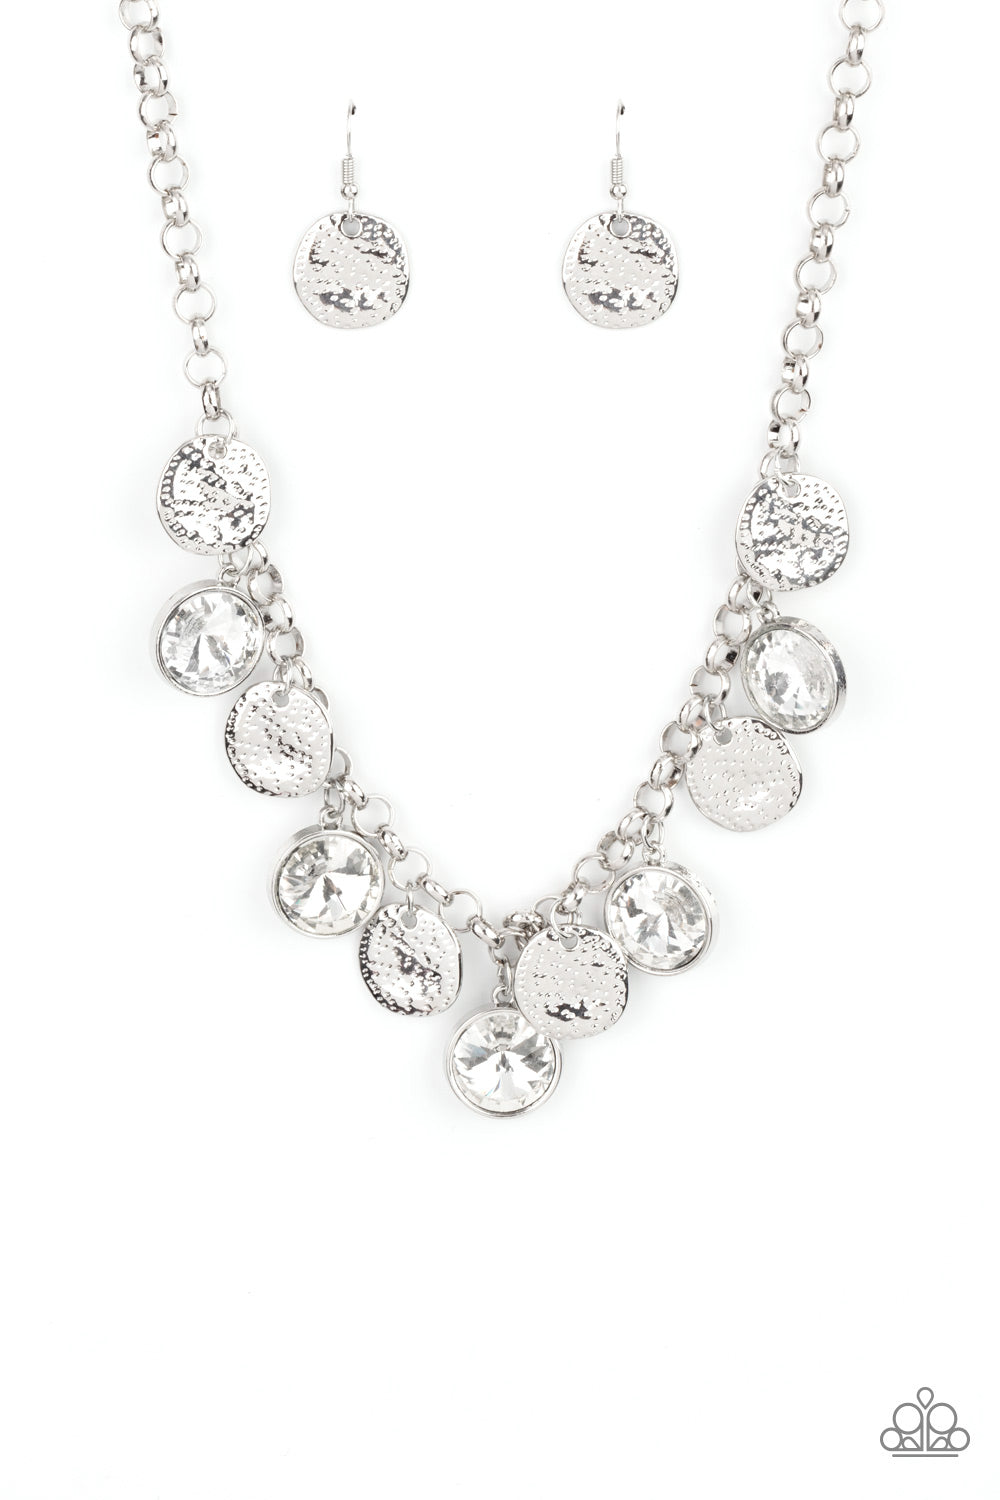 Spot On Sparkle White Necklace - Paparazzi Accessories  A blinding collection of hammered silver discs and oversized white gems swing from the bottom of a bold silver chain, creating noise-making sparkle below the collar. Features an adjustable clasp closure.  All Paparazzi Accessories are lead free and nickel free!  Sold as one individual necklace. Includes one pair of matching earrings.